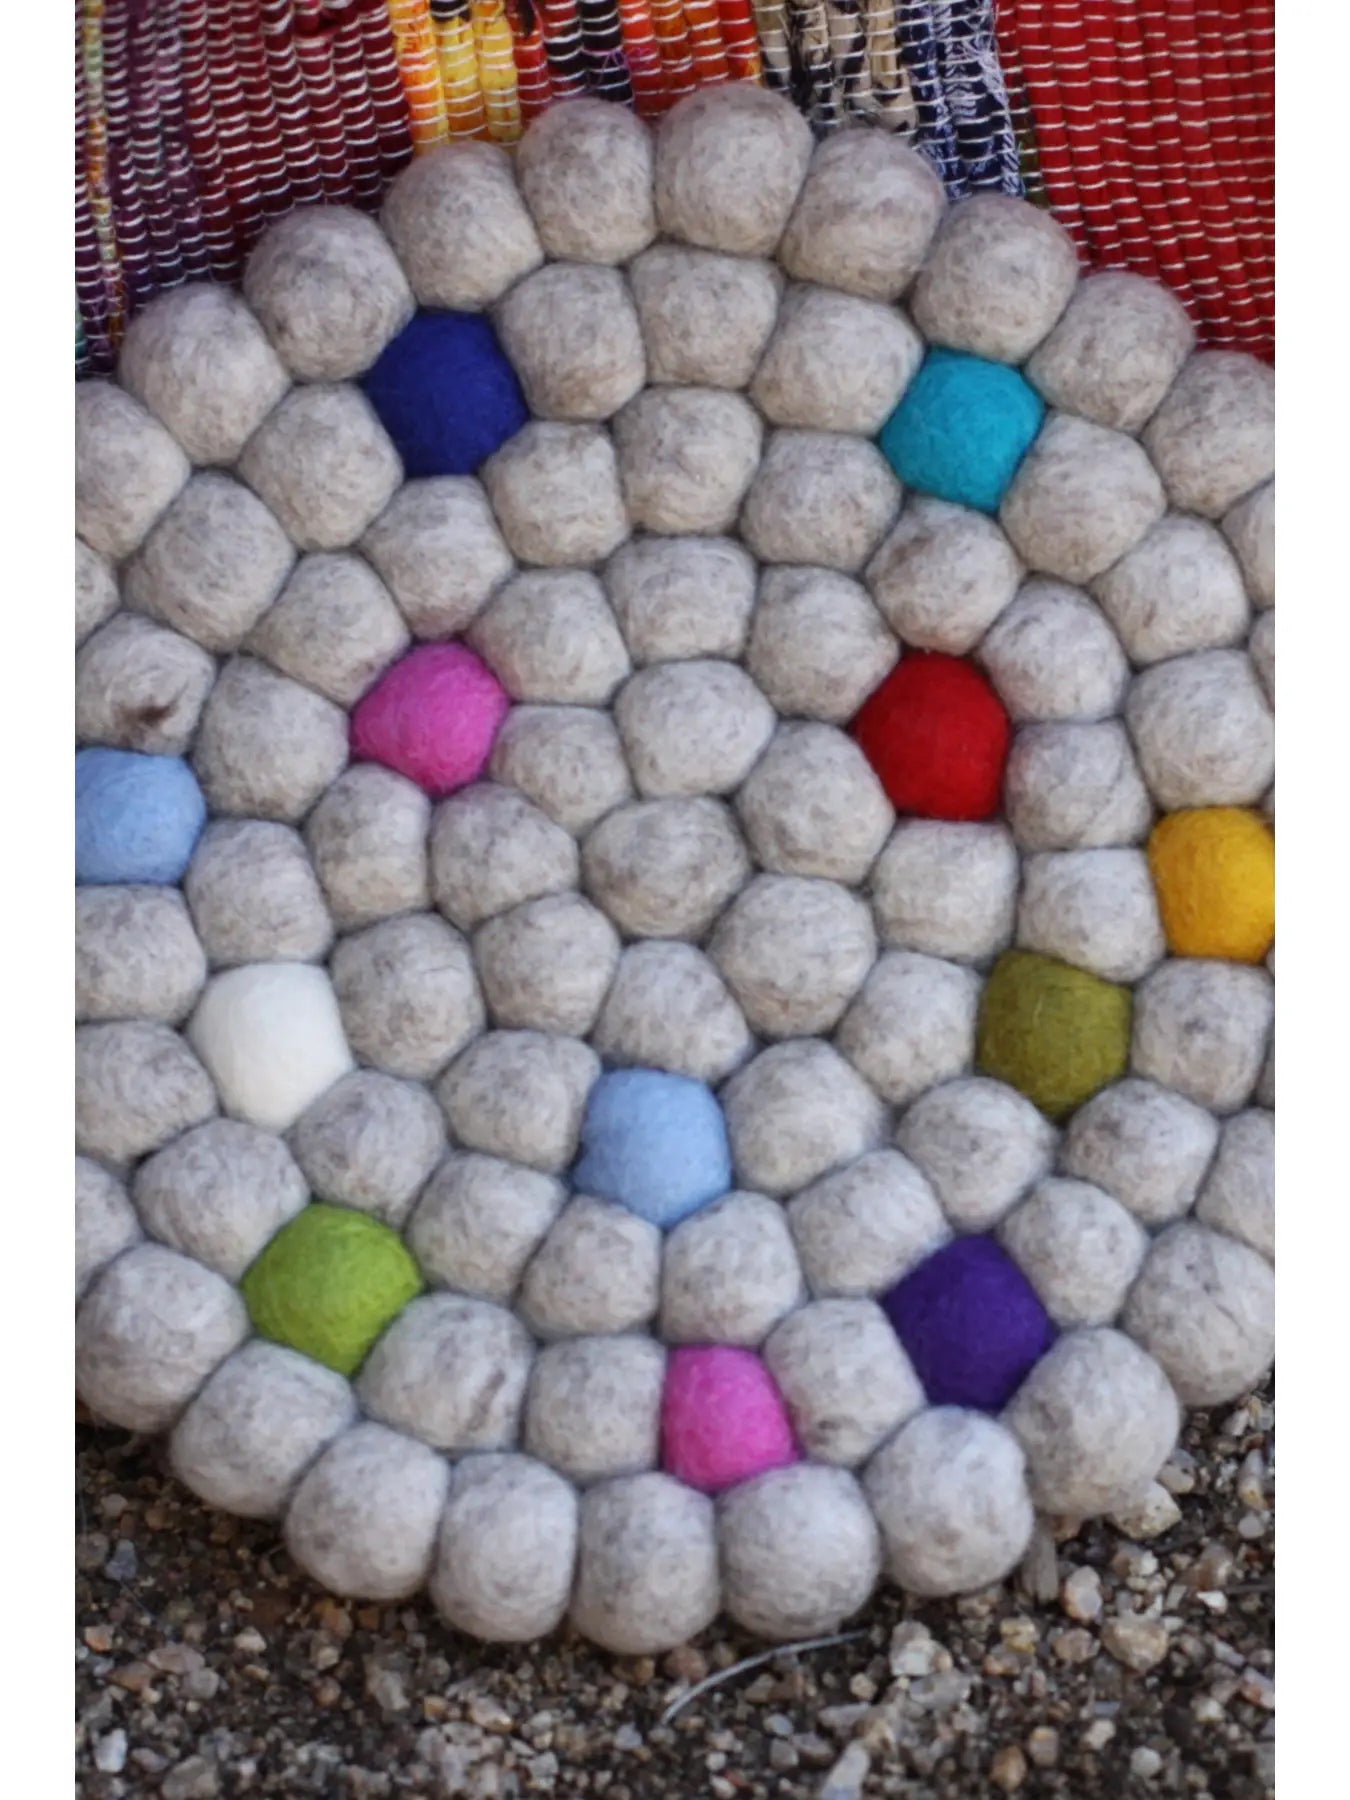 Traditional Felted Wool Trivets - Handmade - Round, Square, Colorful & Neutral!